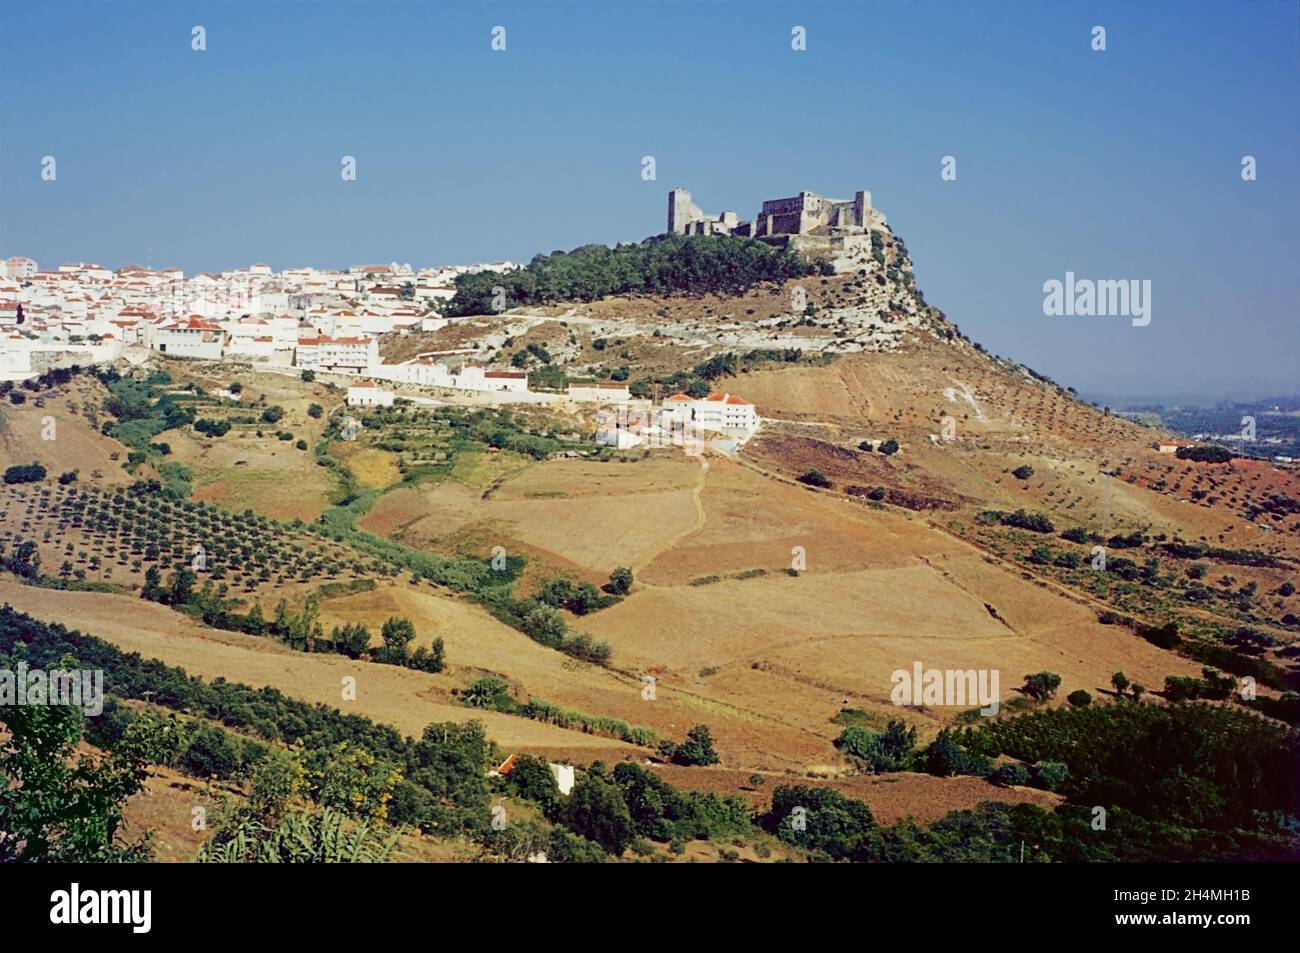 Panorama of Palmela, with its Castelo dominating the landscape: Palmela, Portugal, 50 years ago.  Vintage transparency film photograph from 1969. Stock Photo